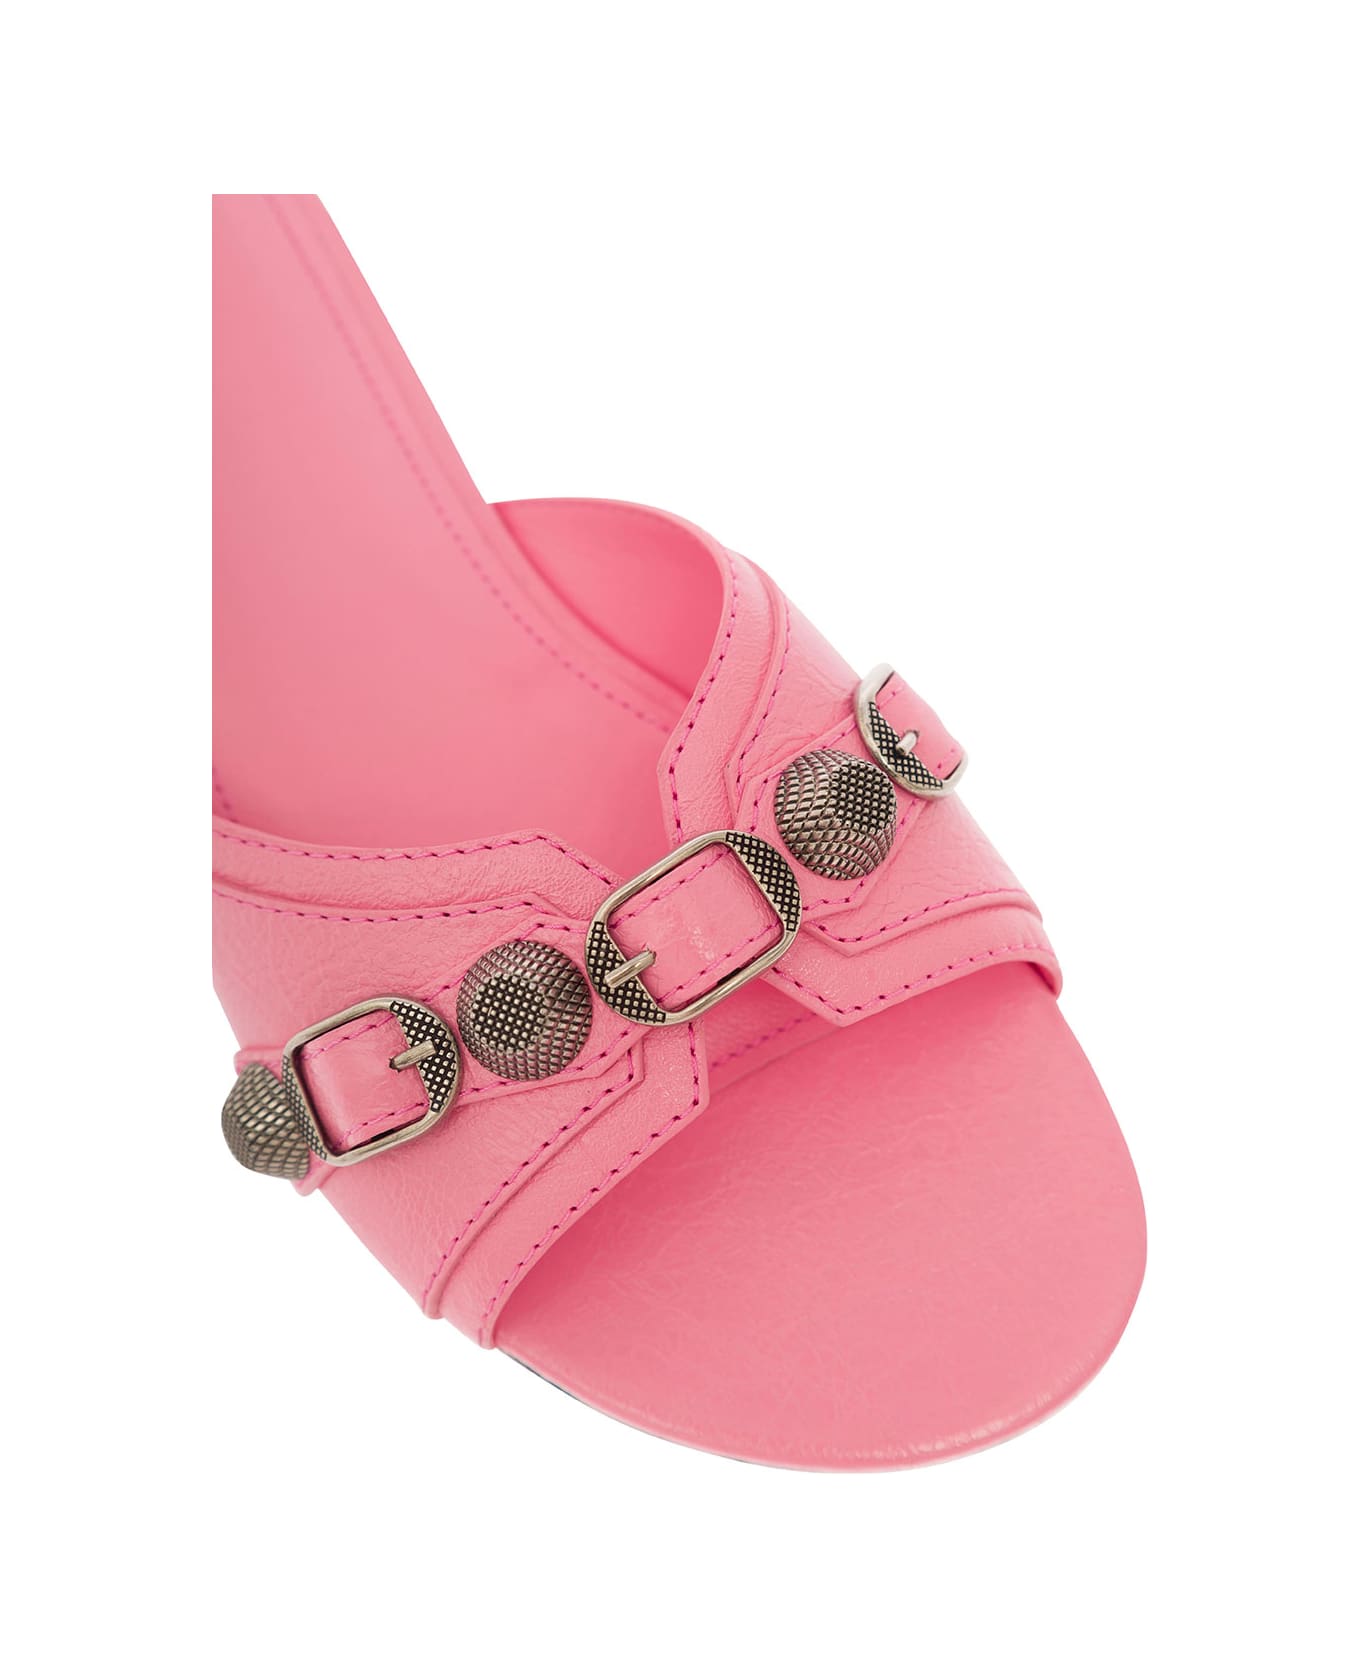 Balenciaga 'cagole' Pink Sandals With Studs And Buckles In Smooth Leather Woman - Pink サンダル